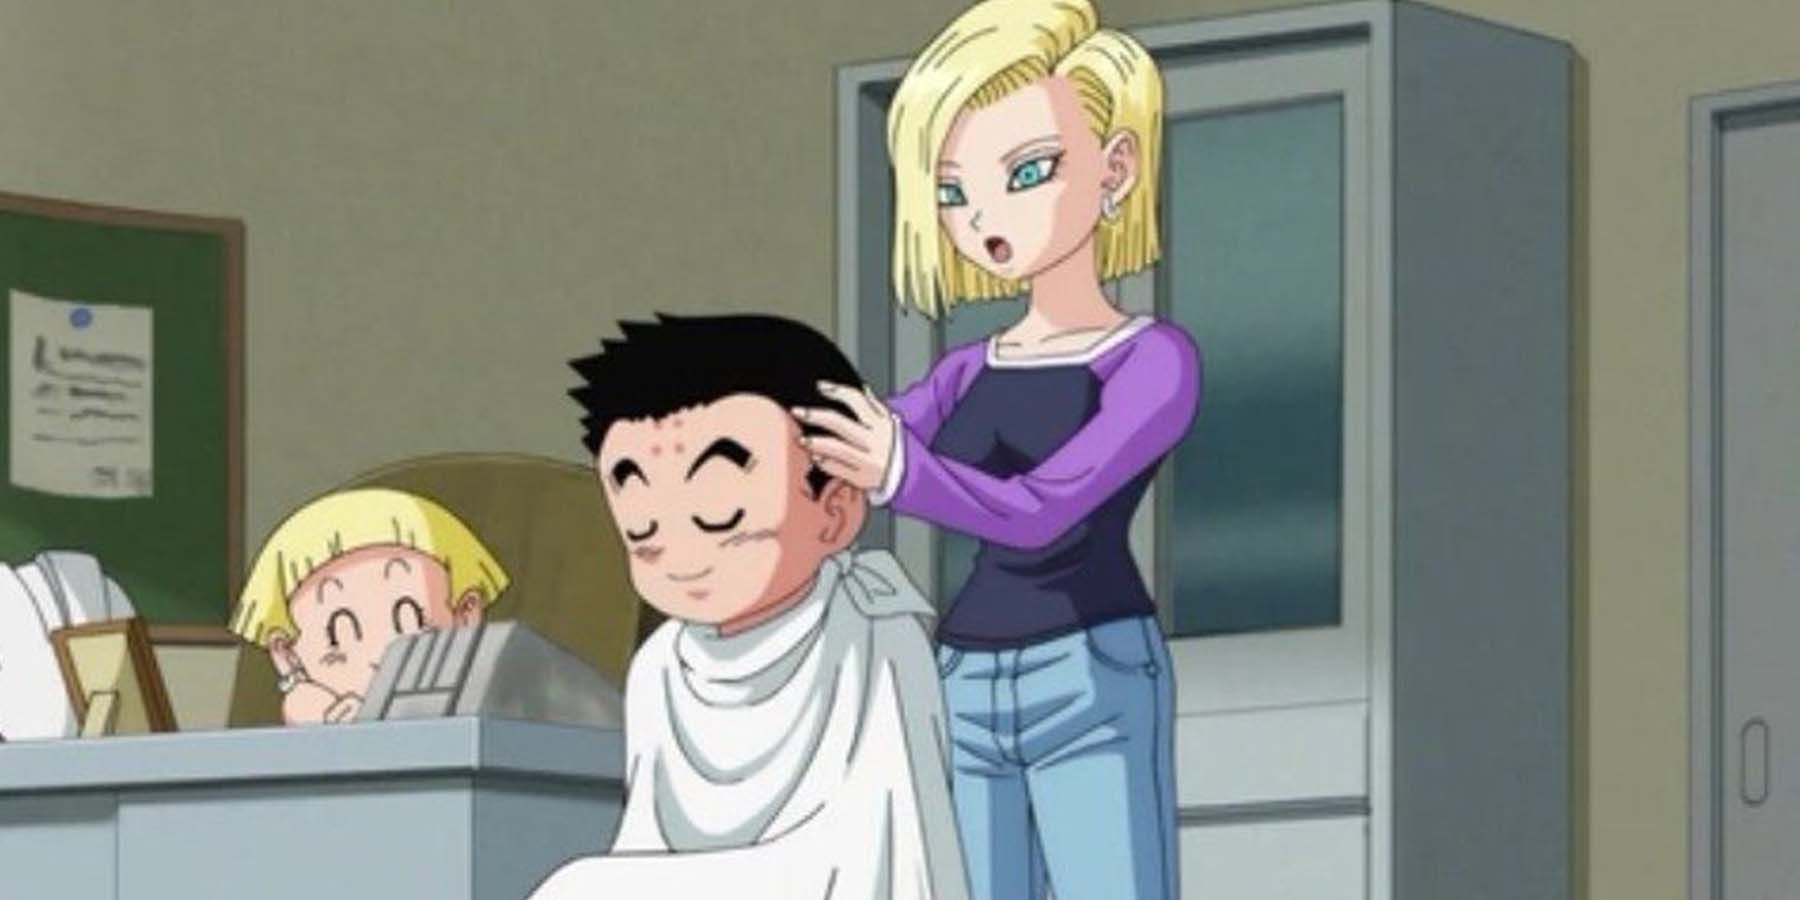 Android 18 shaves Krillin's head